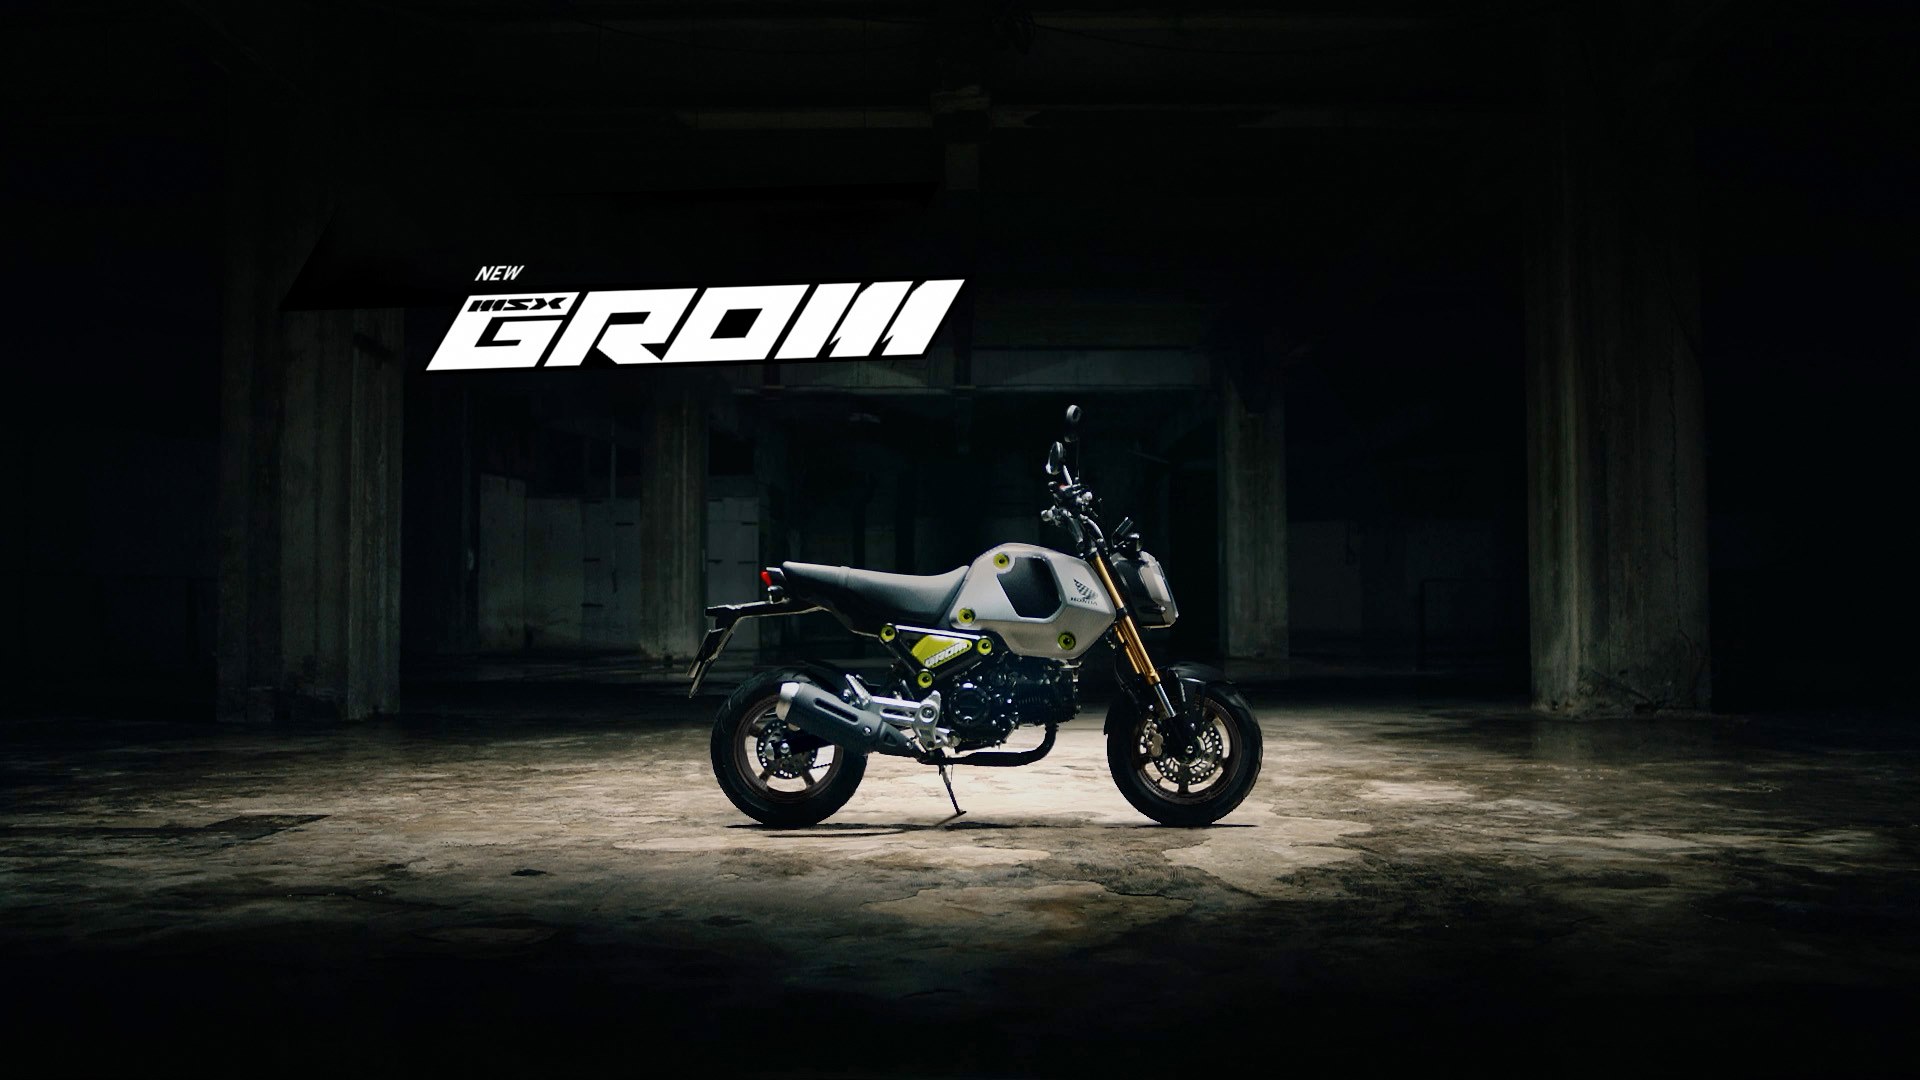 Major Grom 2020 Wallpapers